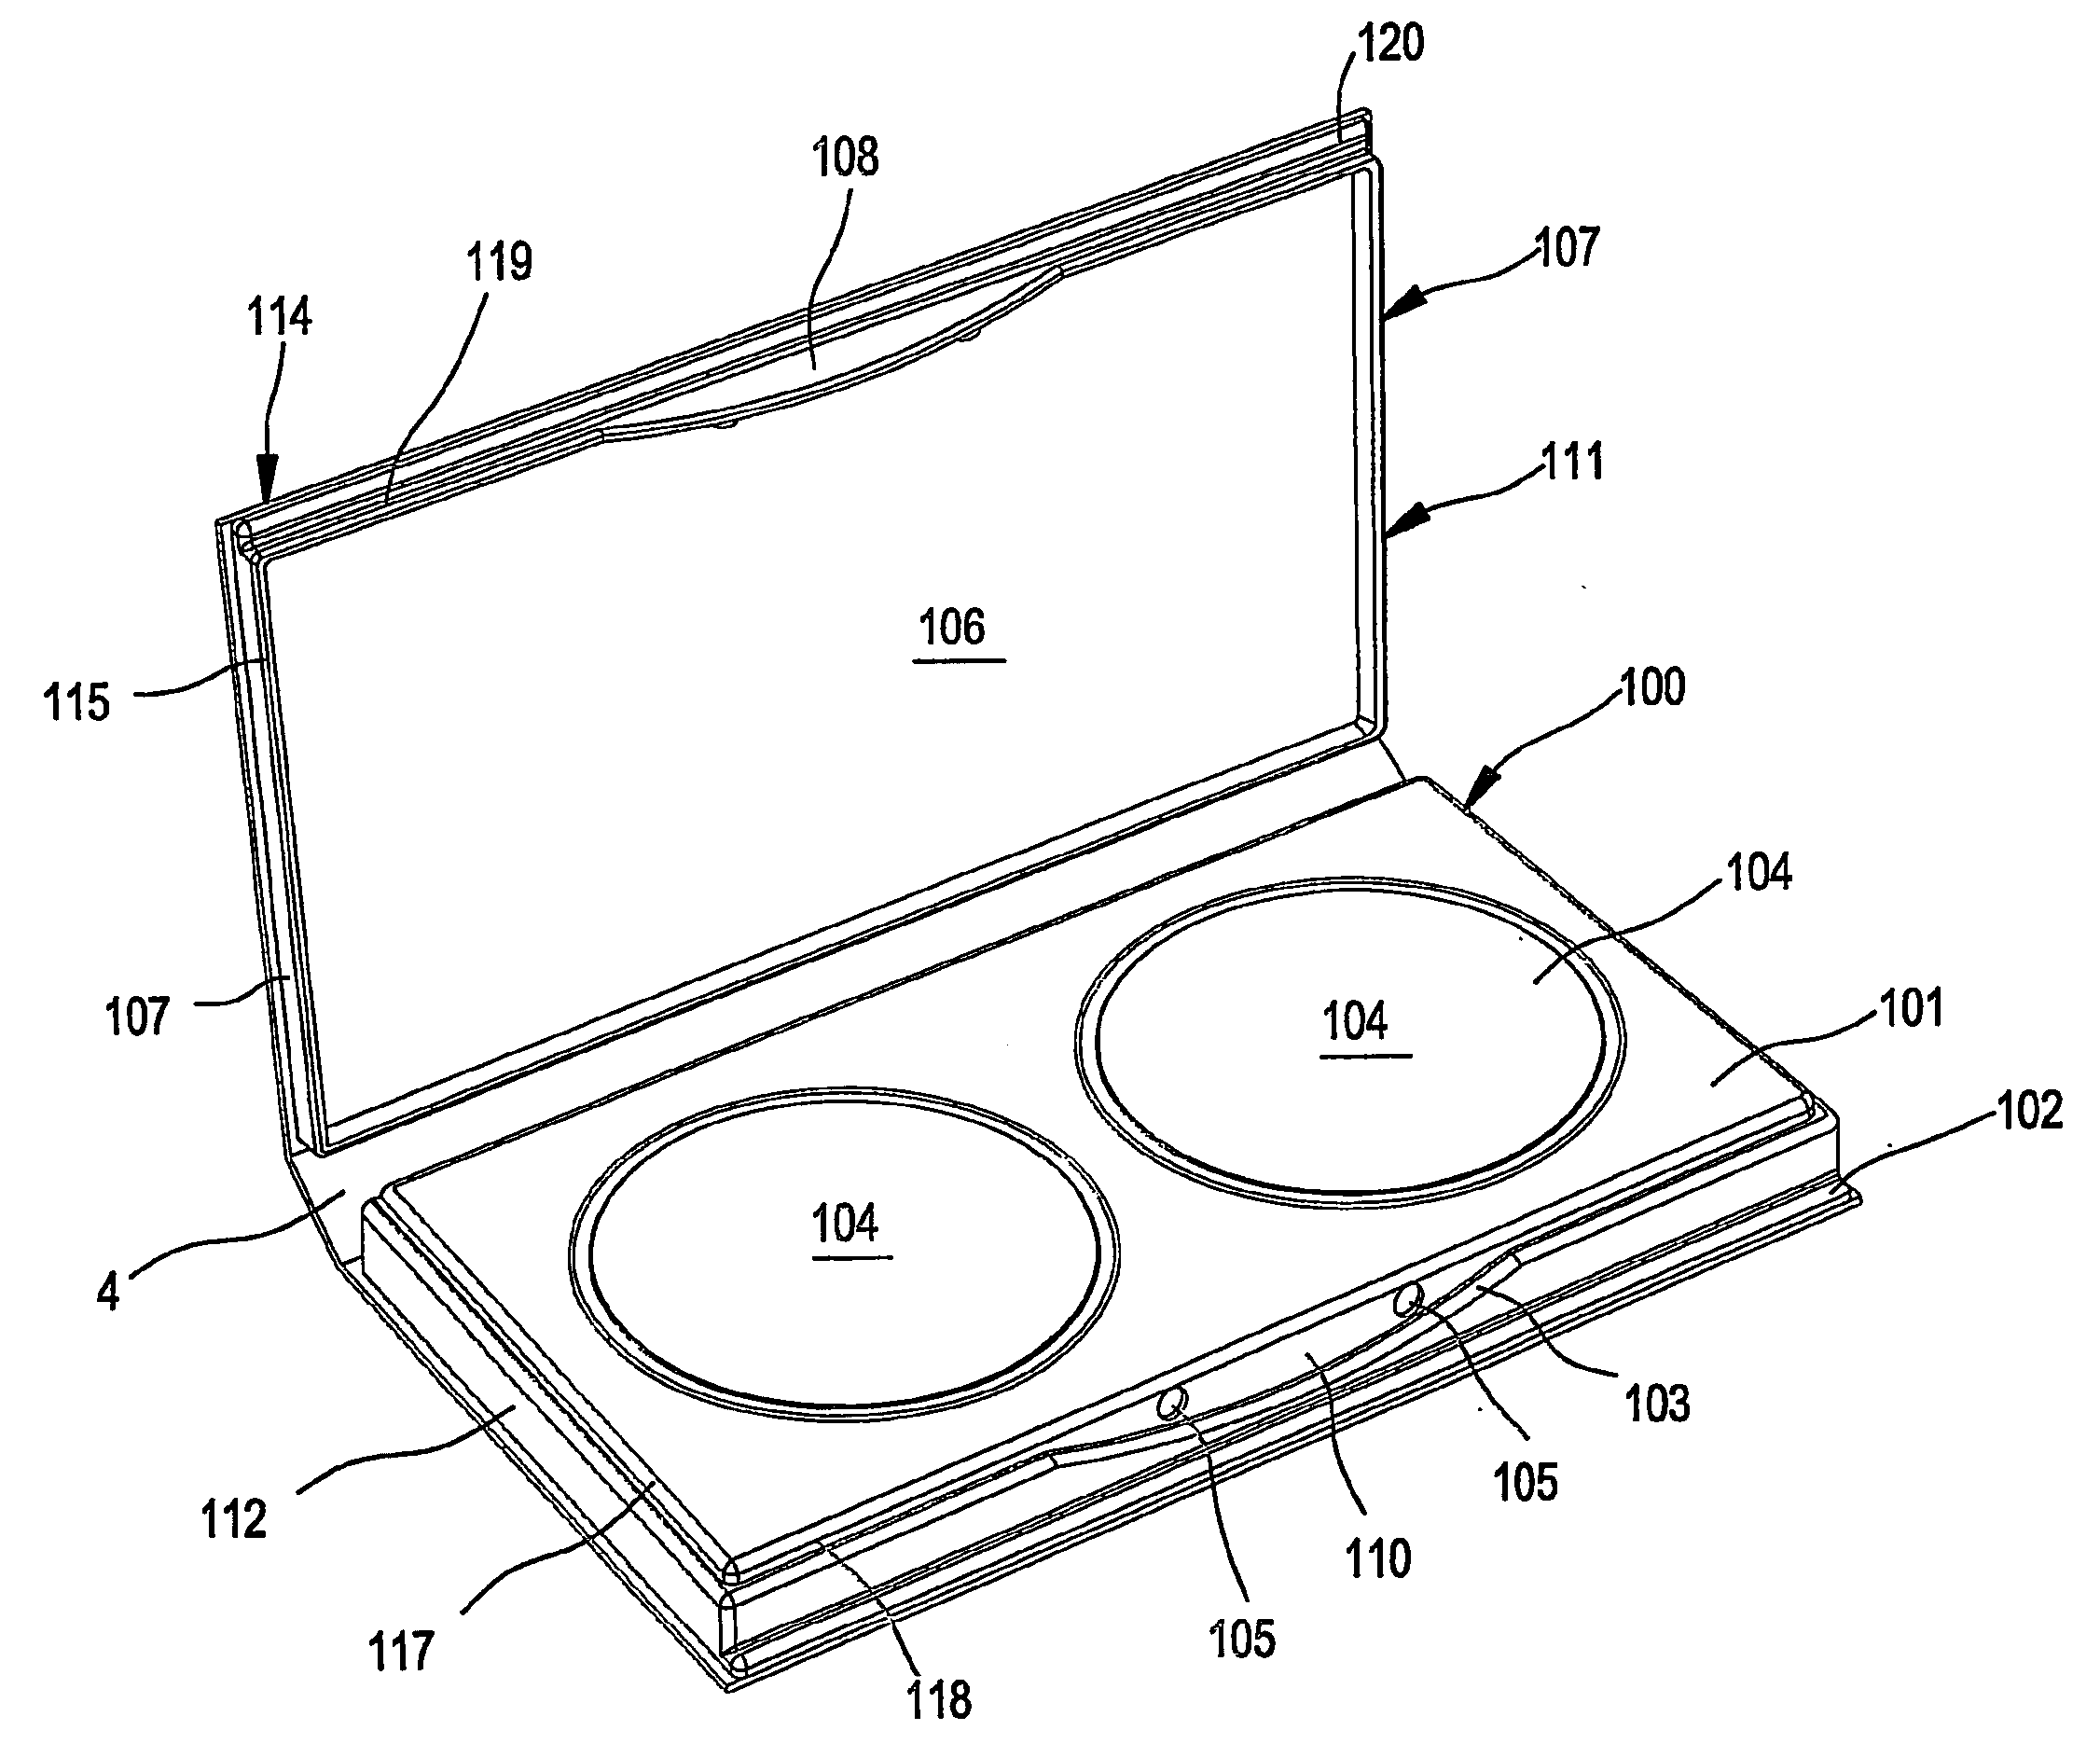 Multi-functional compact with storage receptacles